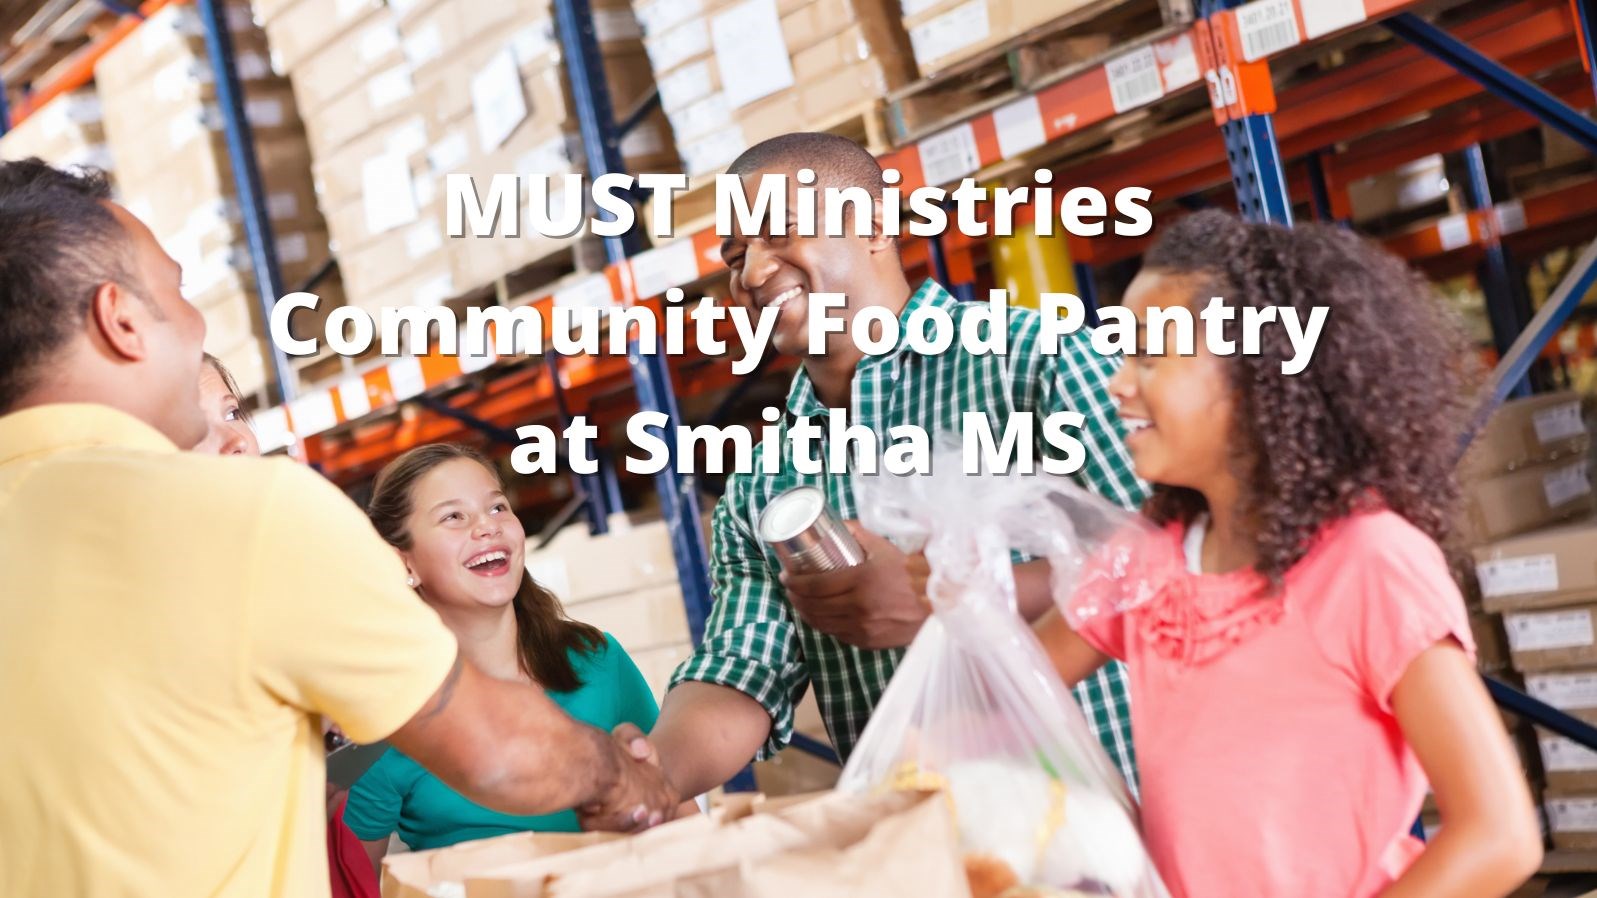 Food pantry with families receiving food. Text Reads: MUST Ministries Community Food Pantry at Smitha MS